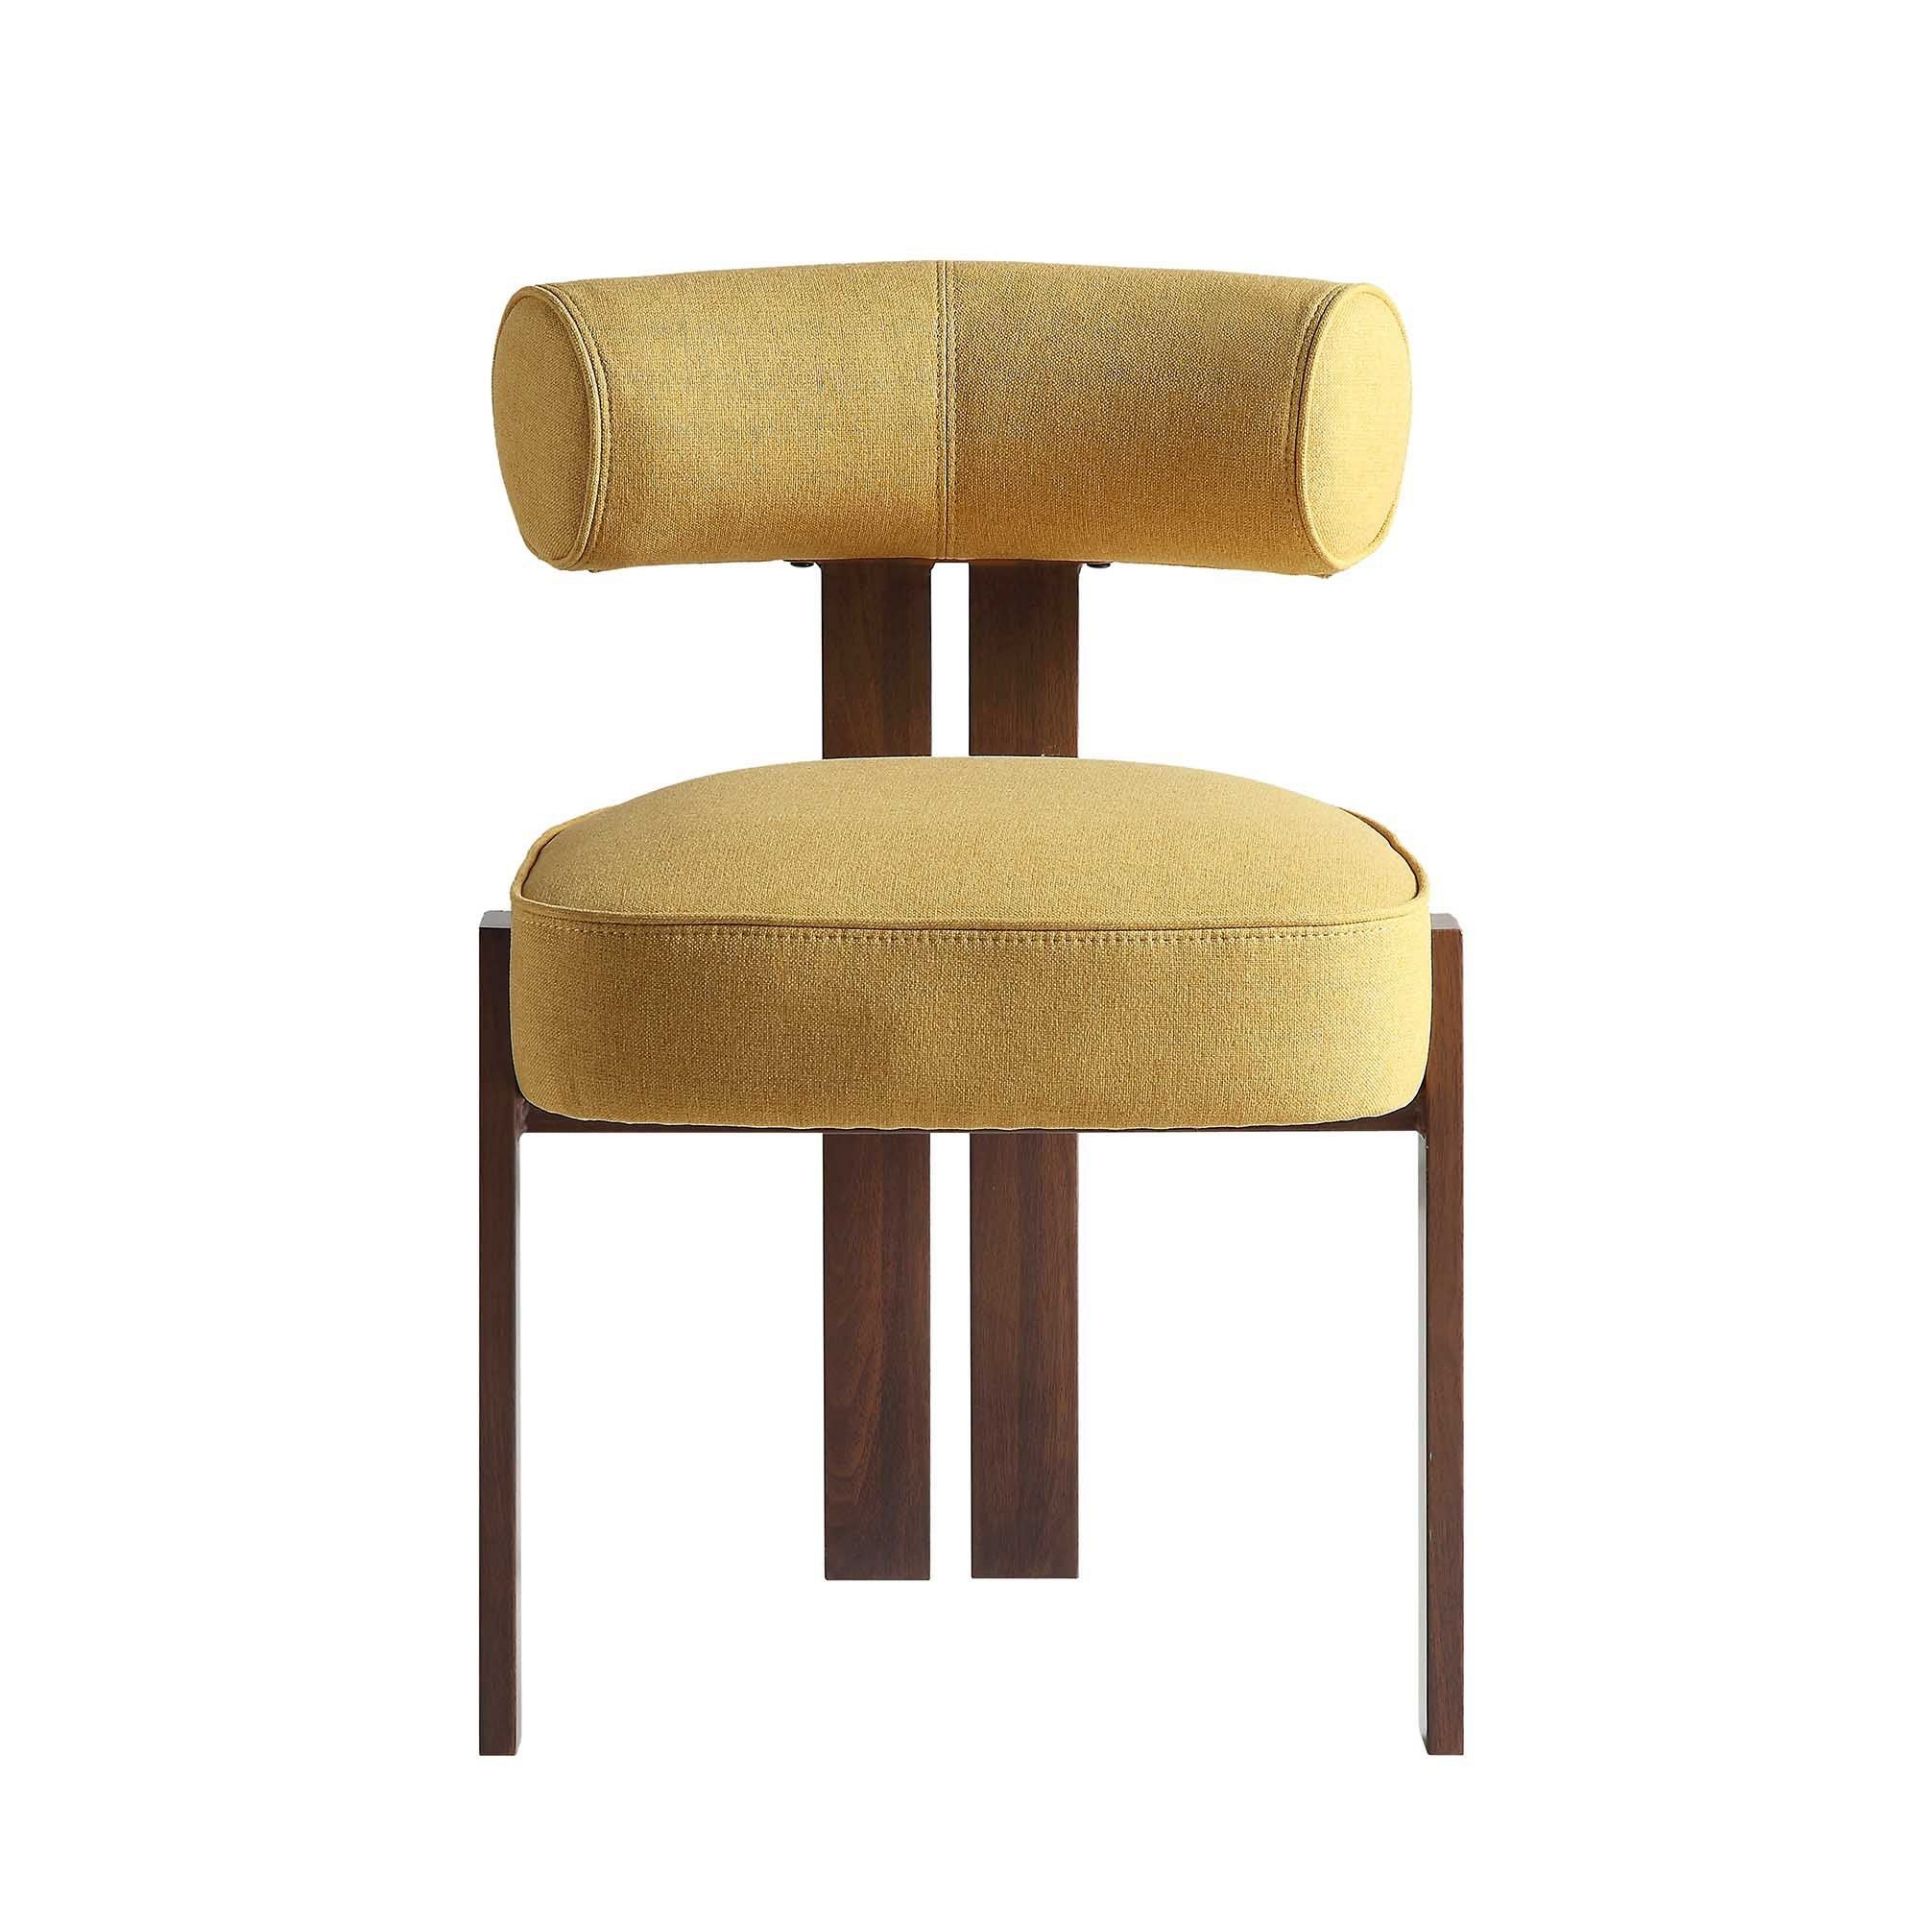 Ophelia Honey Gold Fabric Dining Chair. - R14. RRP £199.99. Upholstered with beautiful yellow fabric